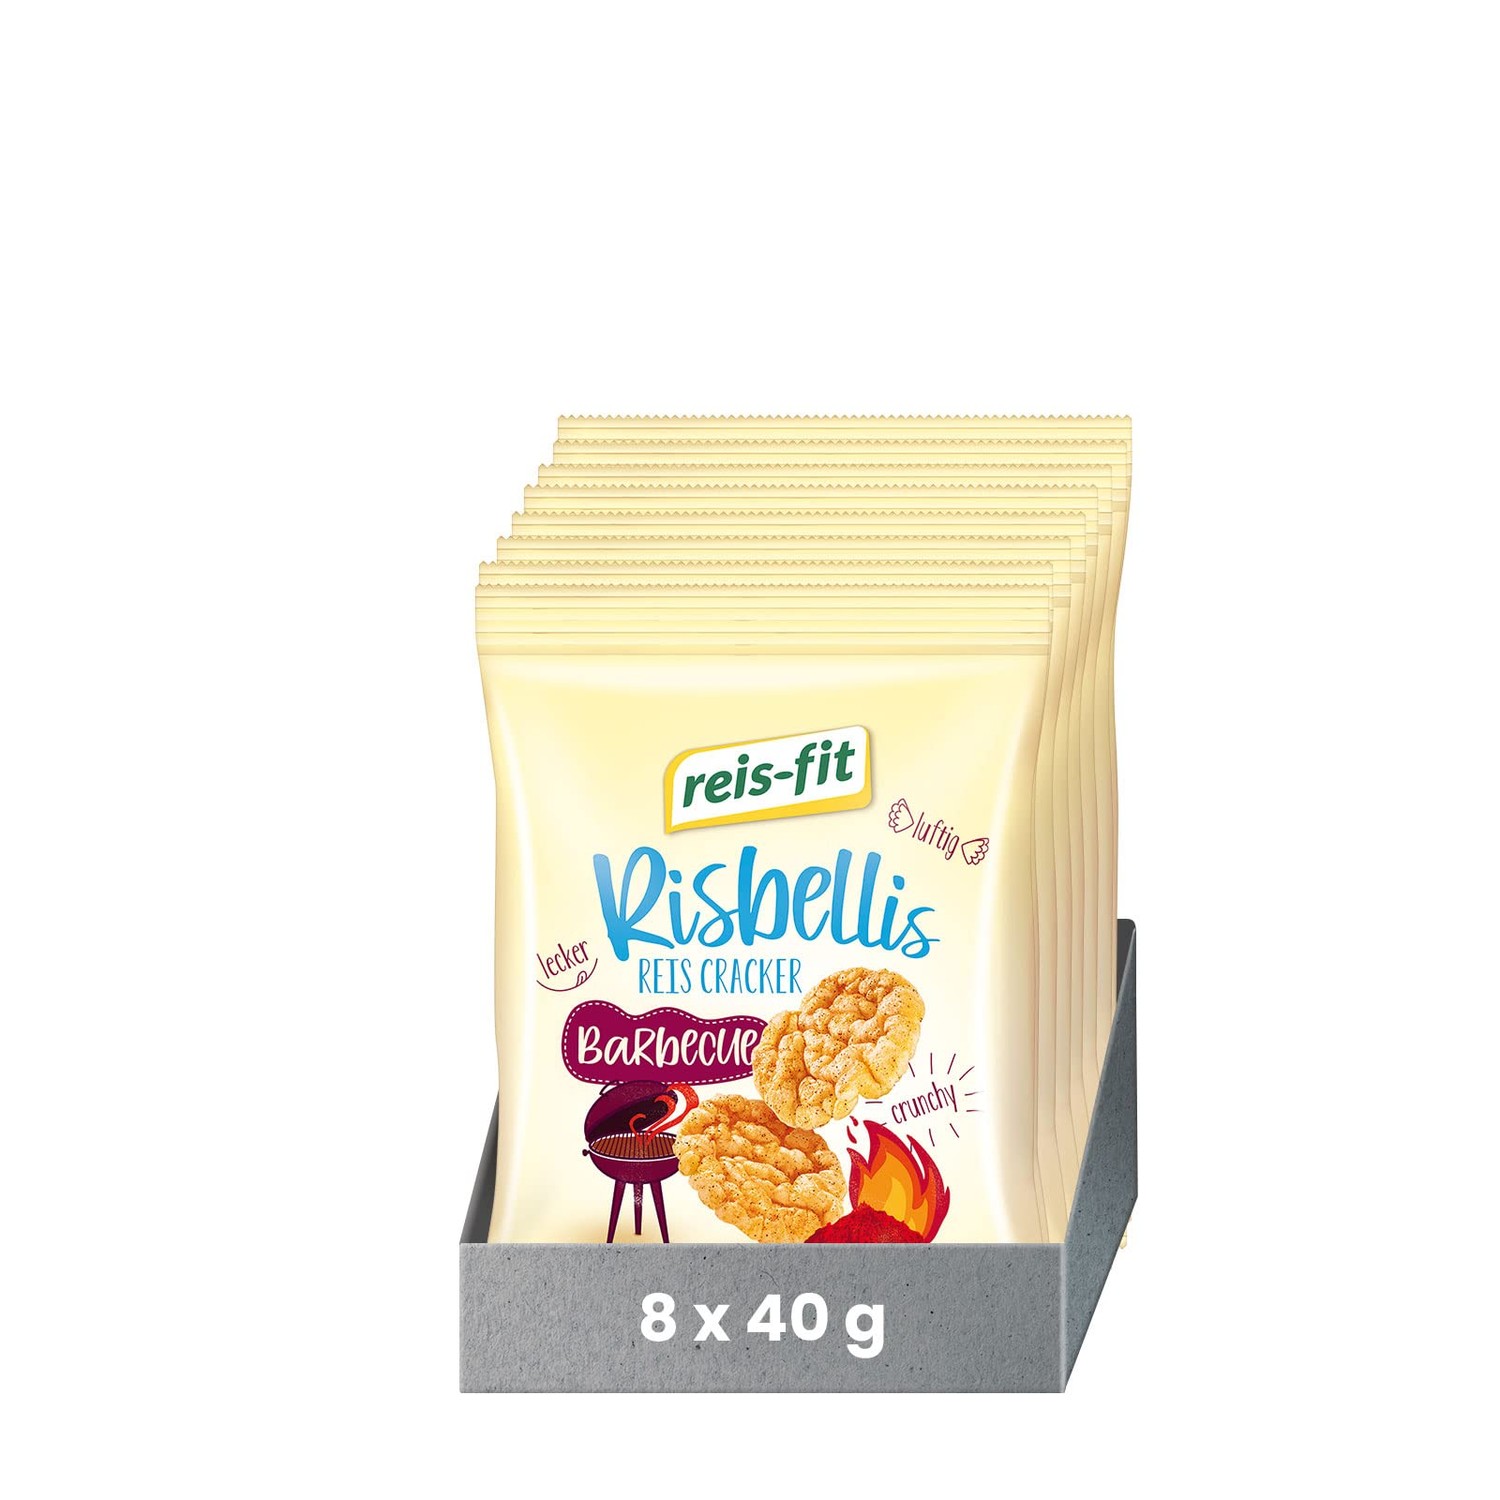 Gluten-Free, Waffle Crispy, the Barbecue 8 x for g, Rice Risbellis on Go 40 Vegan, reis-fit Snack